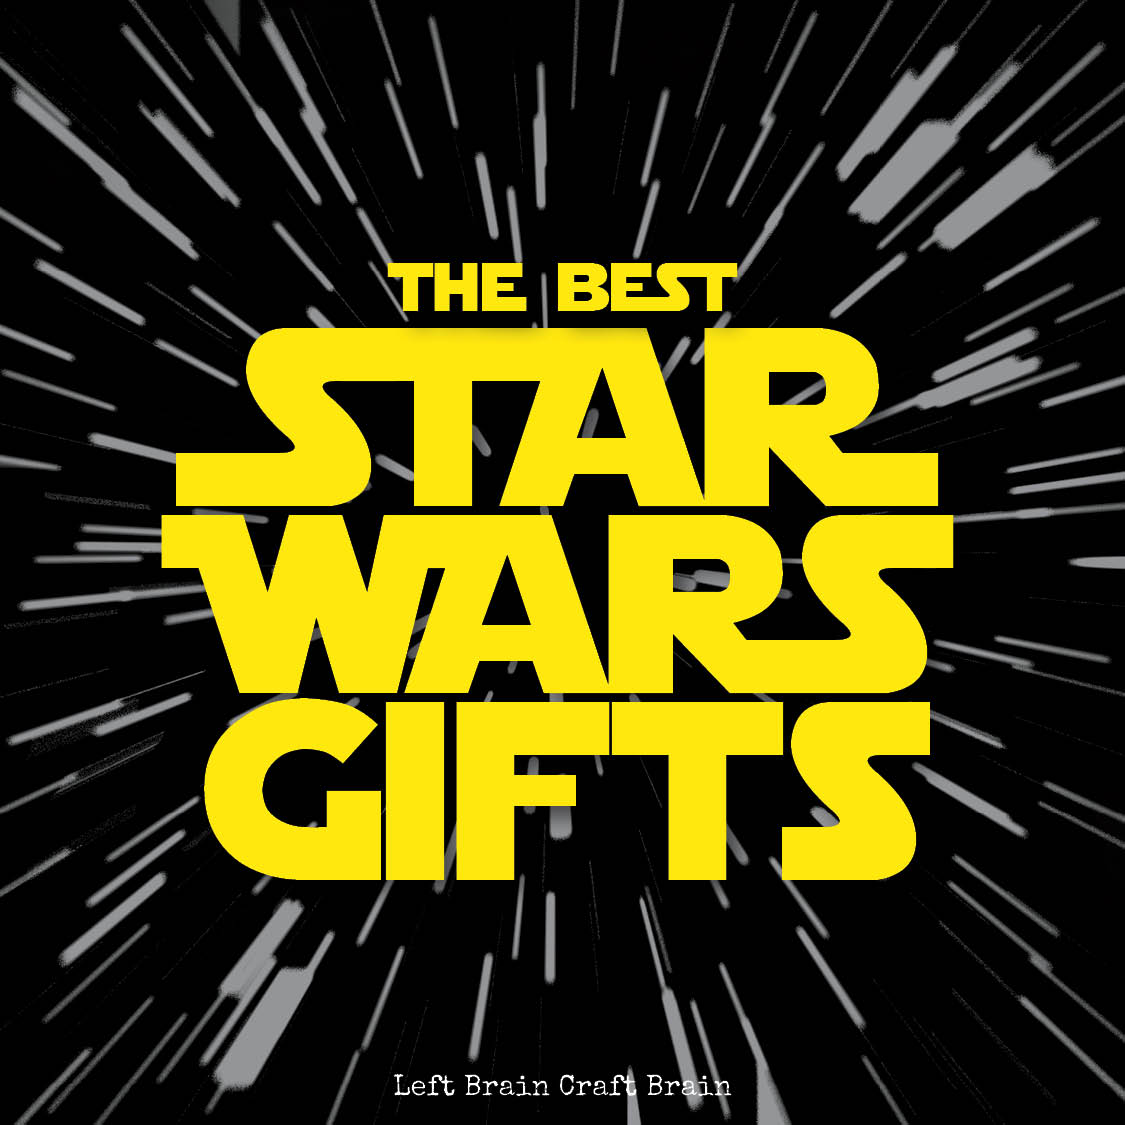 The Best Star Wars Gifts 1000x1000 v2